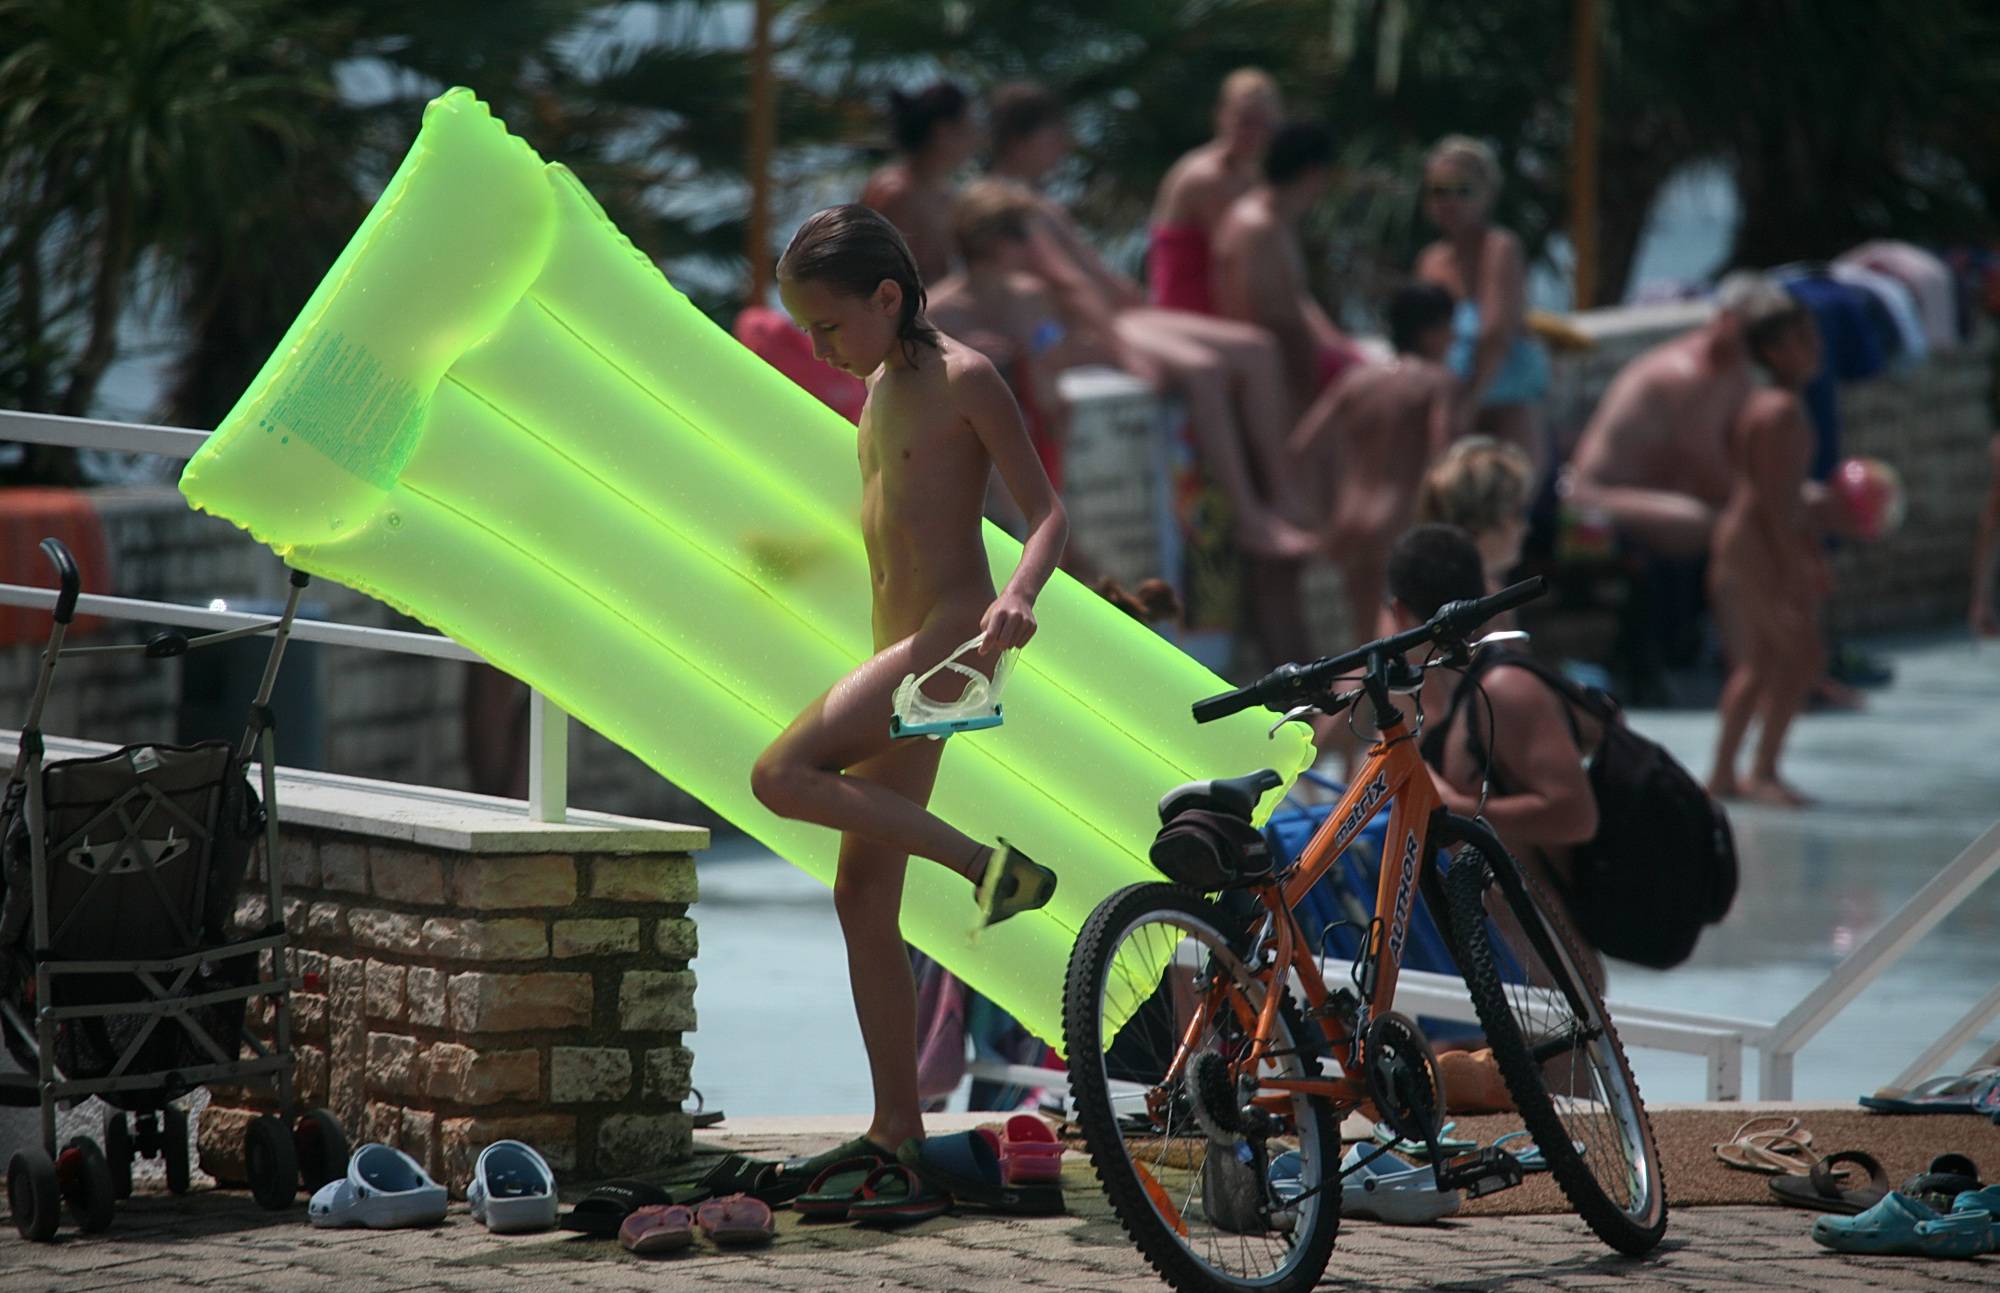 Nudist Pics Neon Inflatable Water Toy - 1